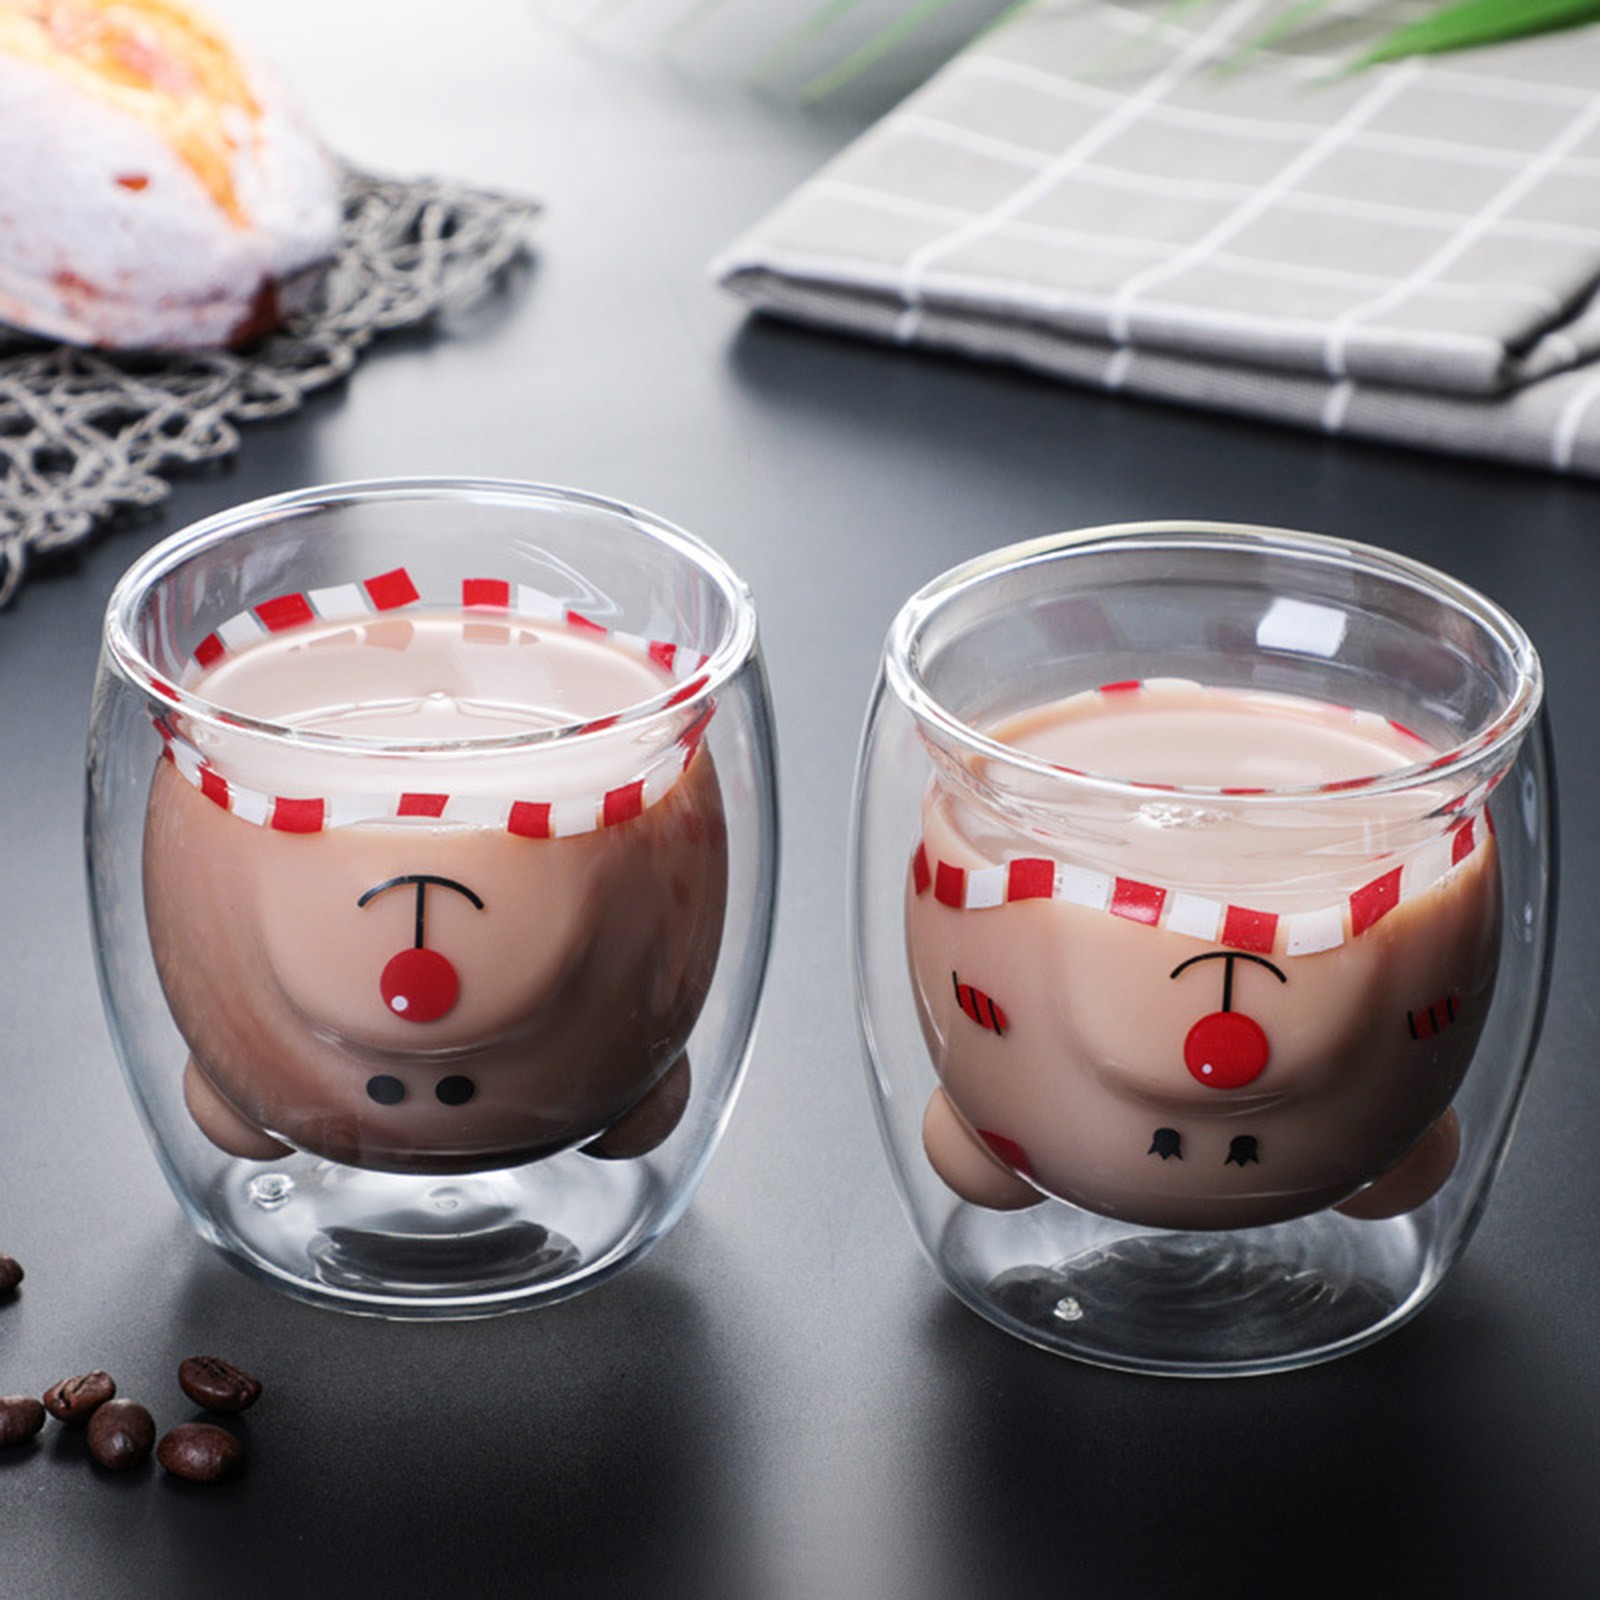 Lovely Glass Mugs Bear Cat Dog Animal Double-layer Tea Milk Coffee Cup With Round Mouth Prevent Scald Cartoon Christmas Gift